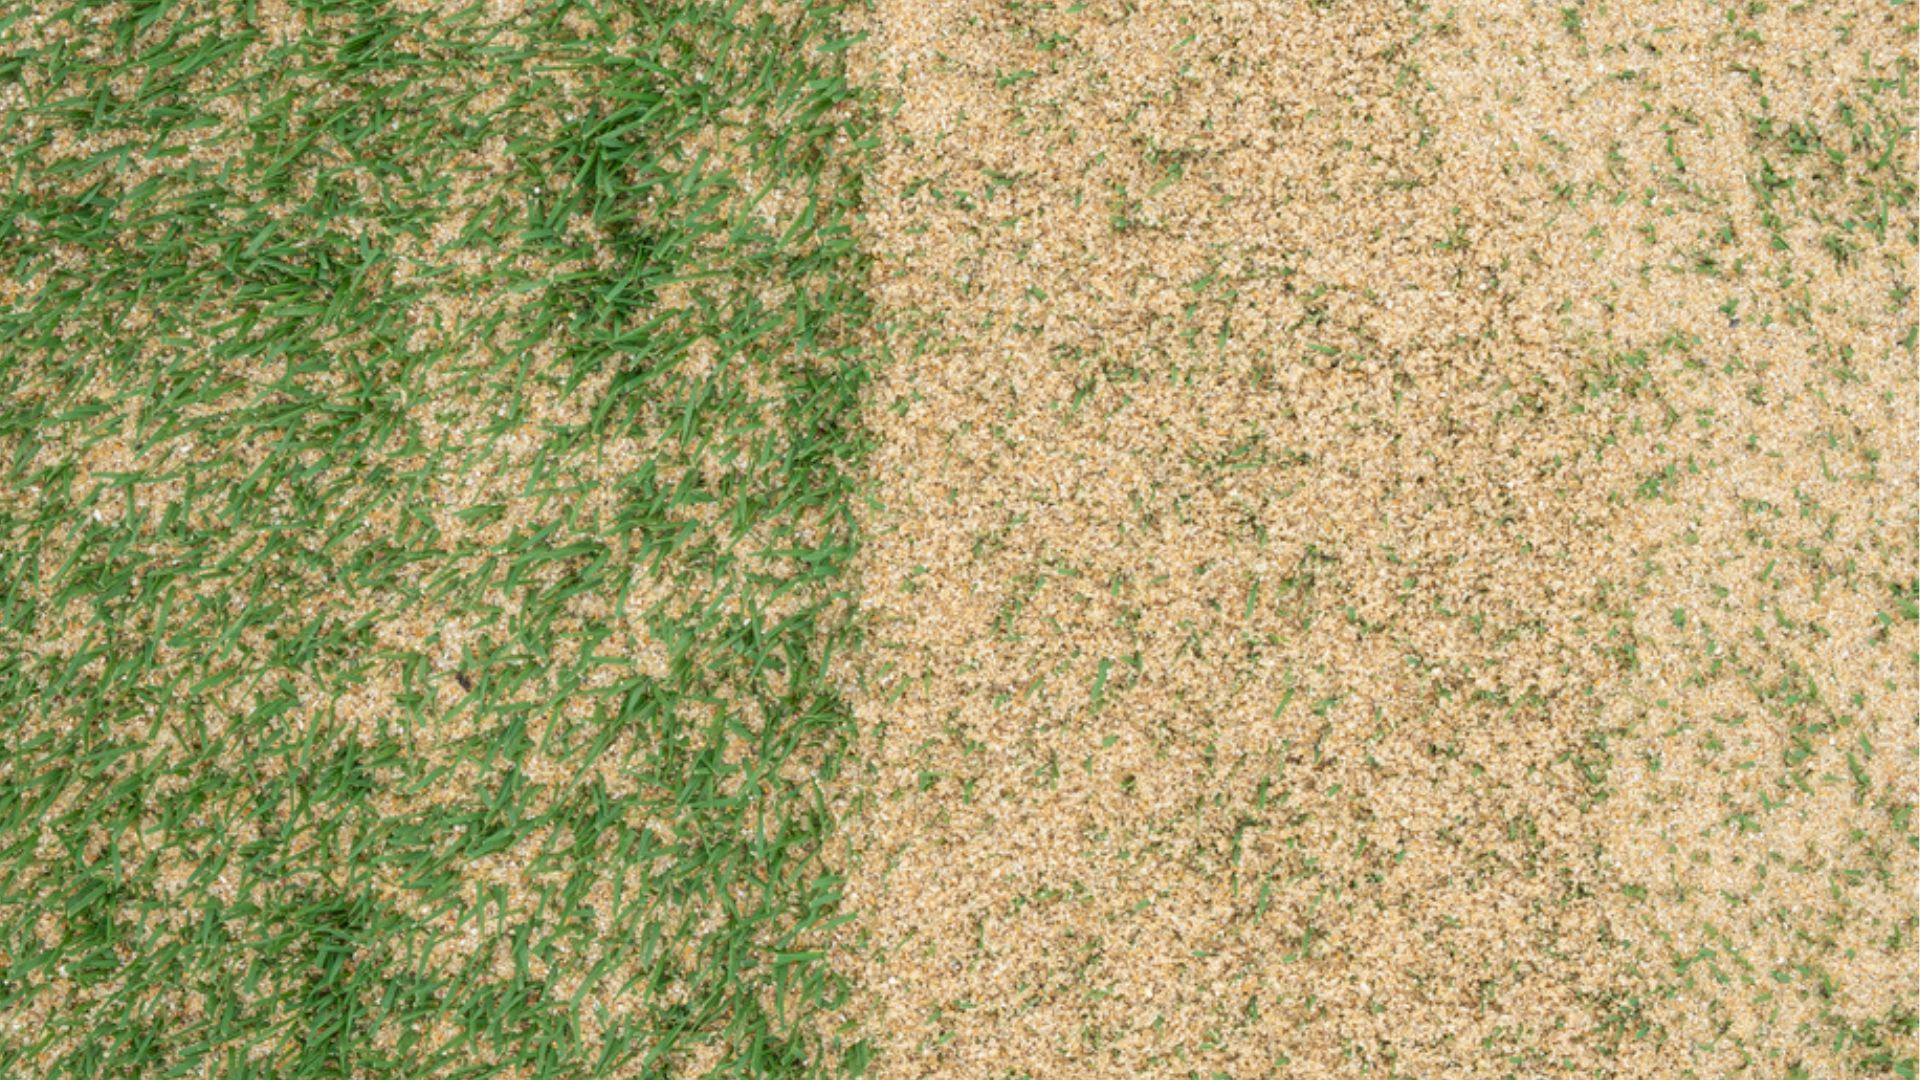 Use These Sand Tips To Supercharge Your Lawn And Make Your Grass Flourish Like Never Before